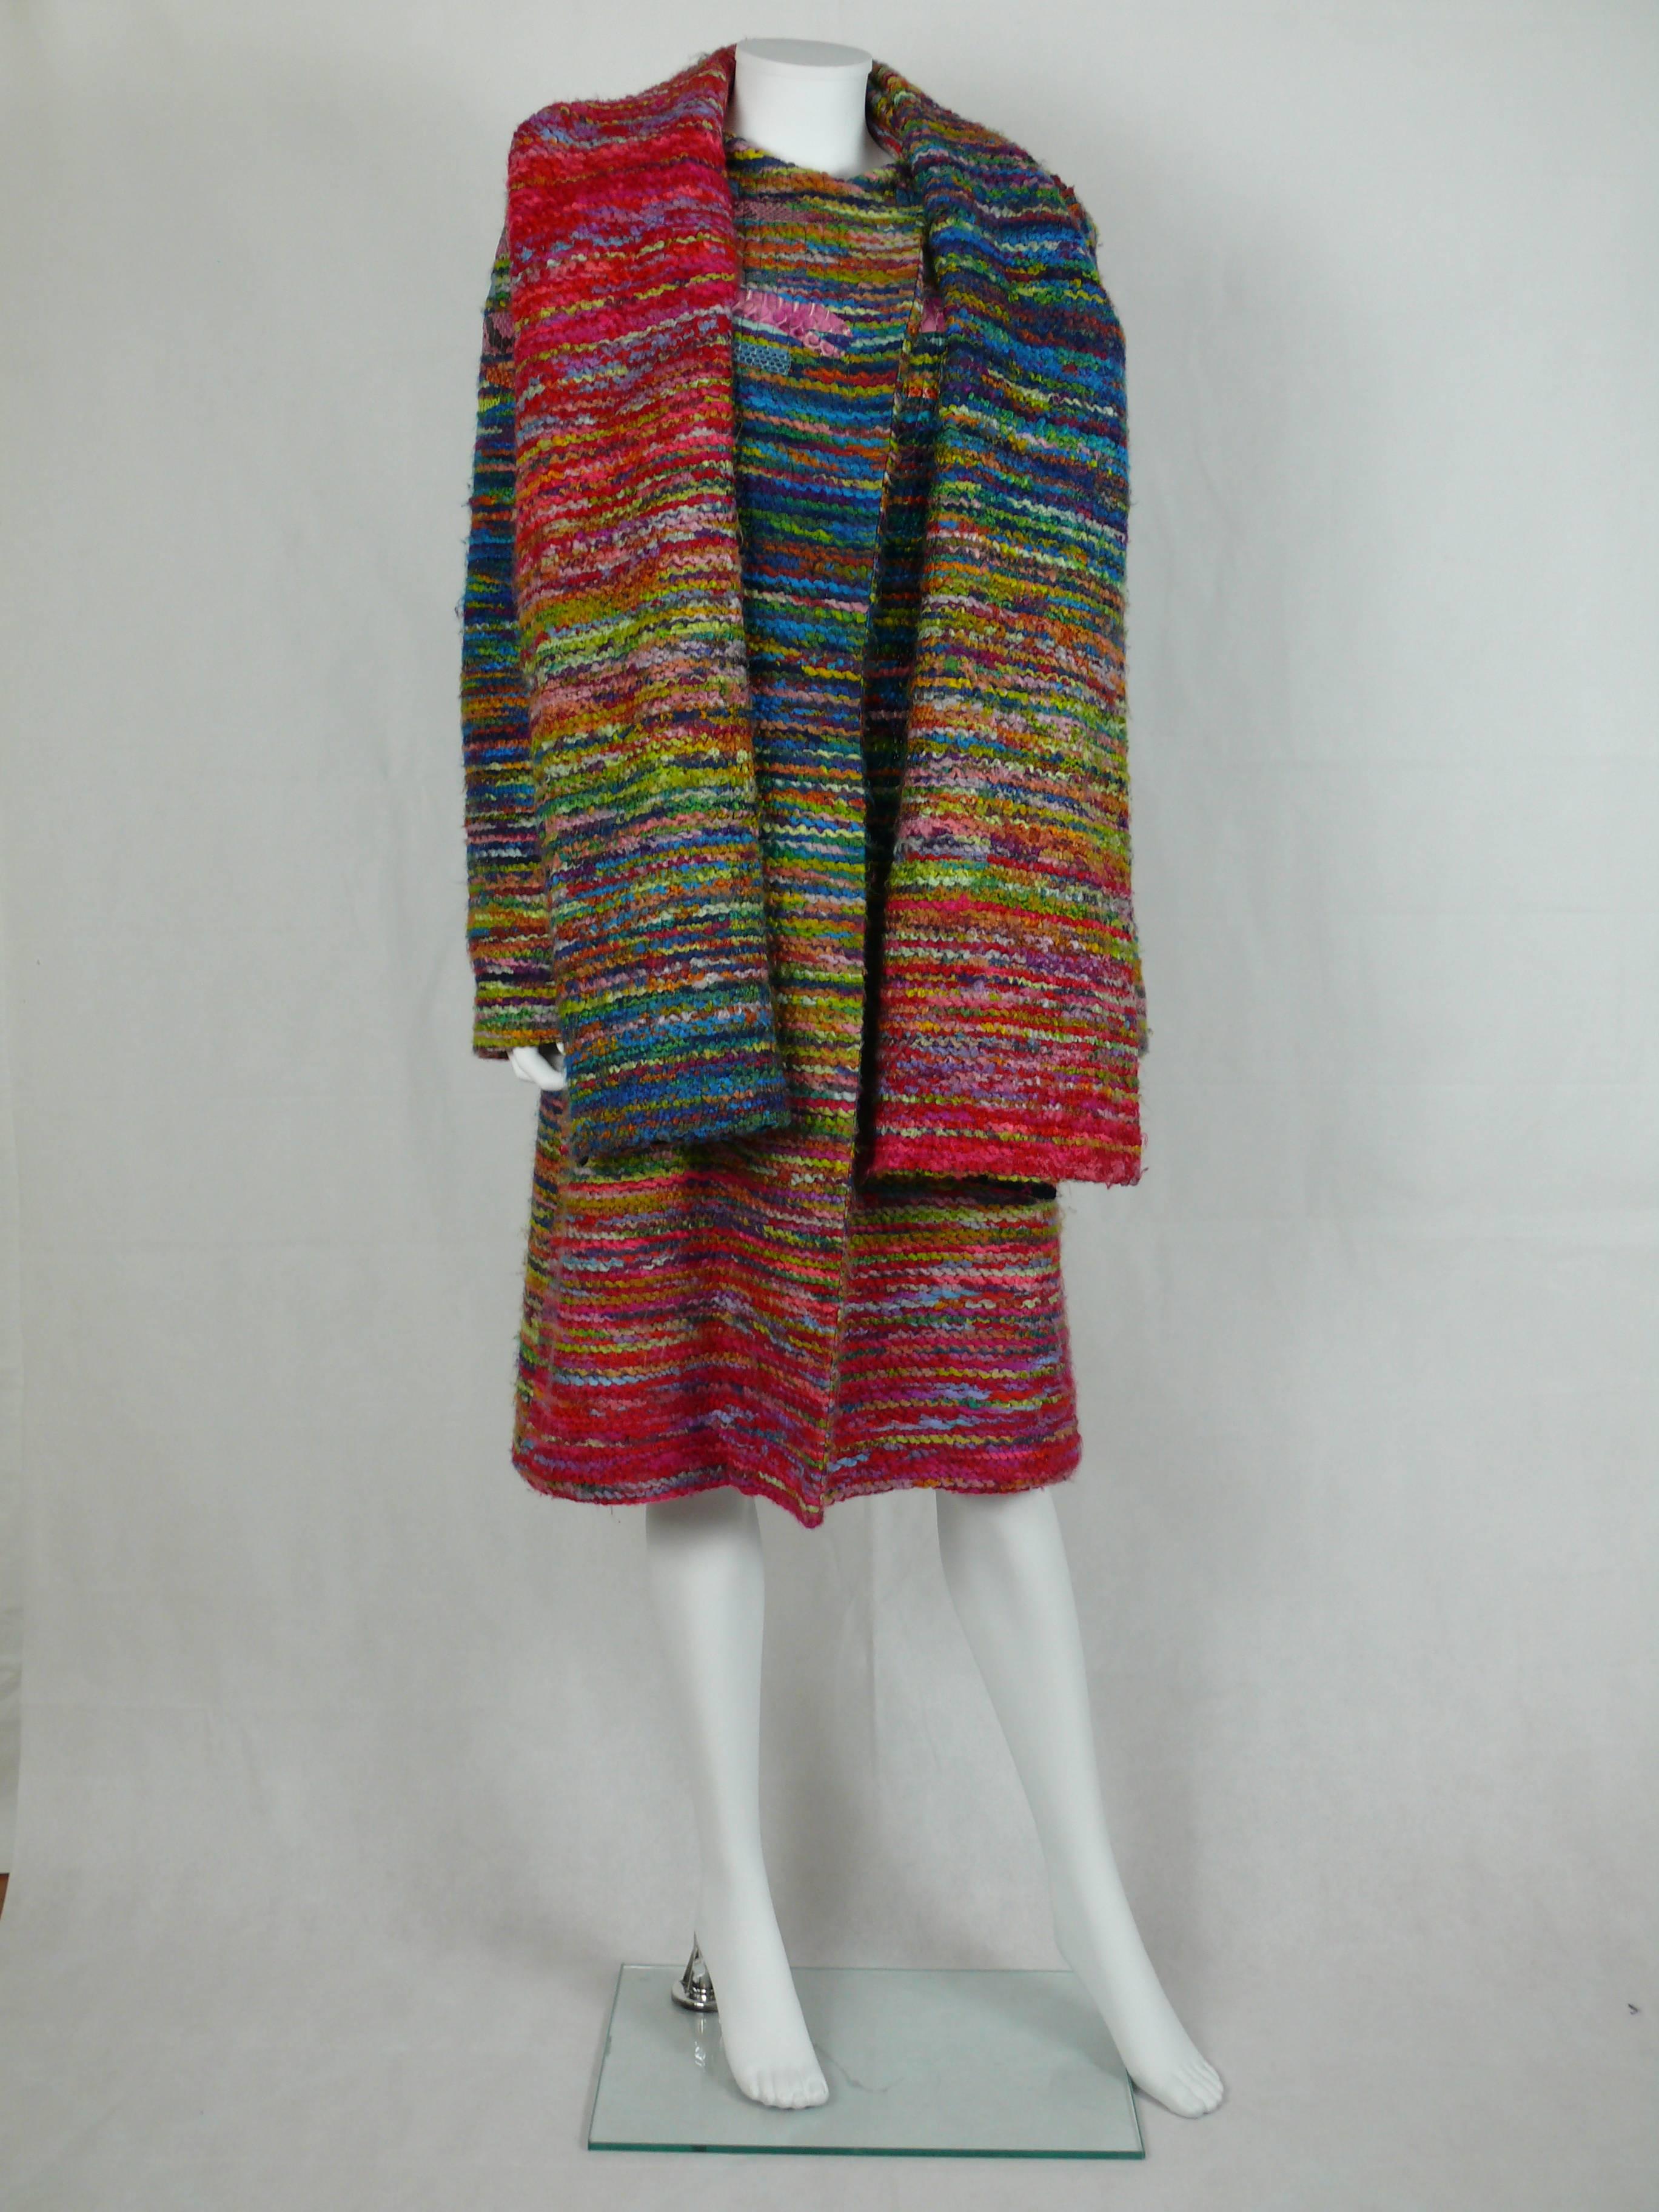 CHRISTIAN LACROIX gorgeous vintage rainbow color coat with whip appliqués.

Comes with matching stole.

Fully lined.

Label reads CHRISTIAN LACROIX Paris.

COAT
Marked size : 38 (please refer to measurements).
Indicative measurements